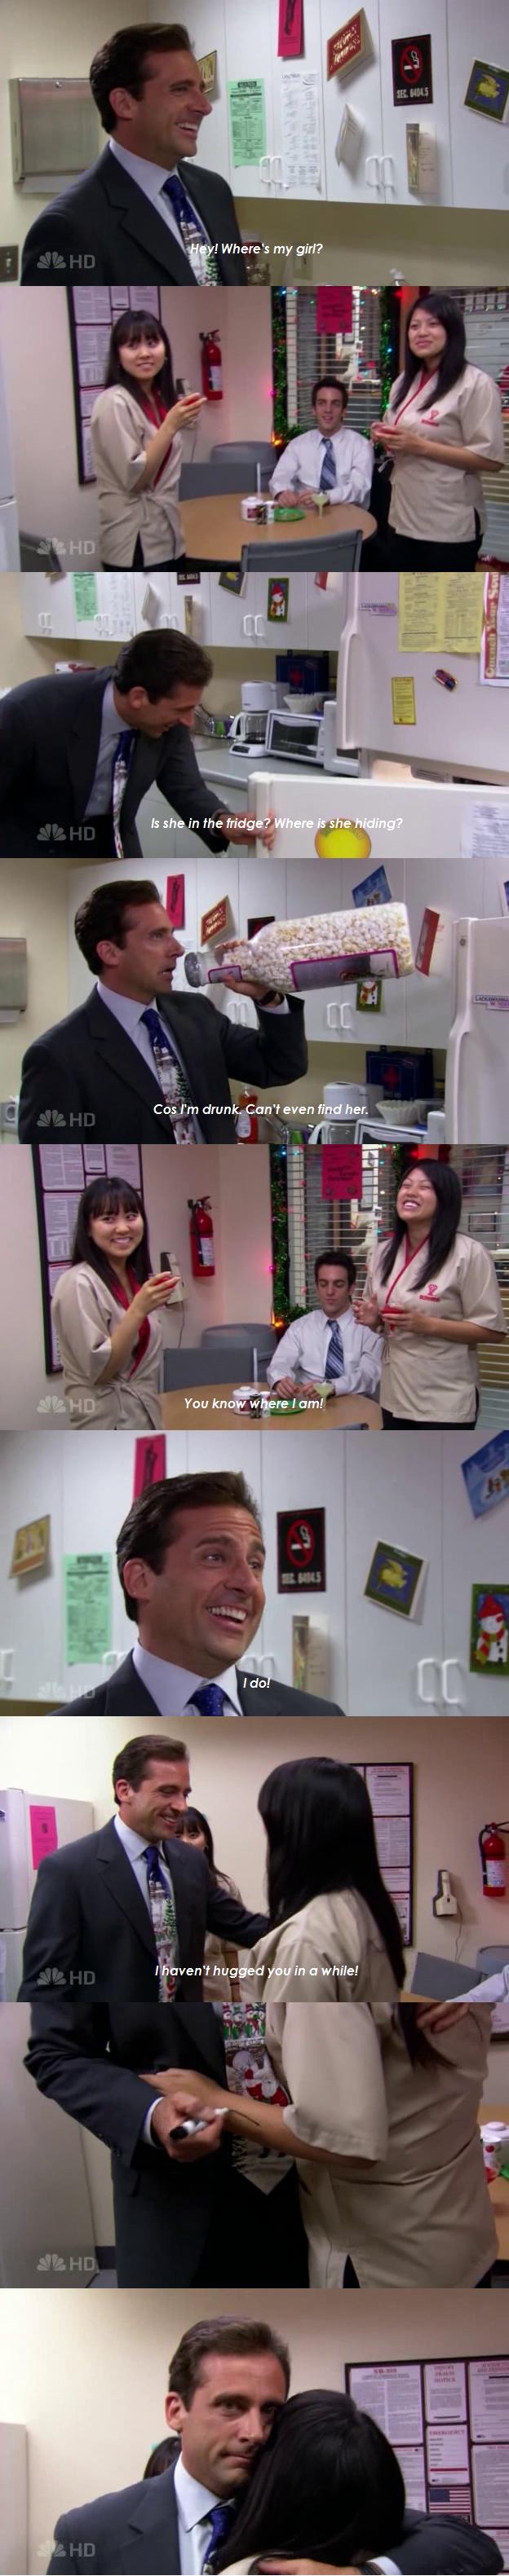 One of the funniest scenes from The Office